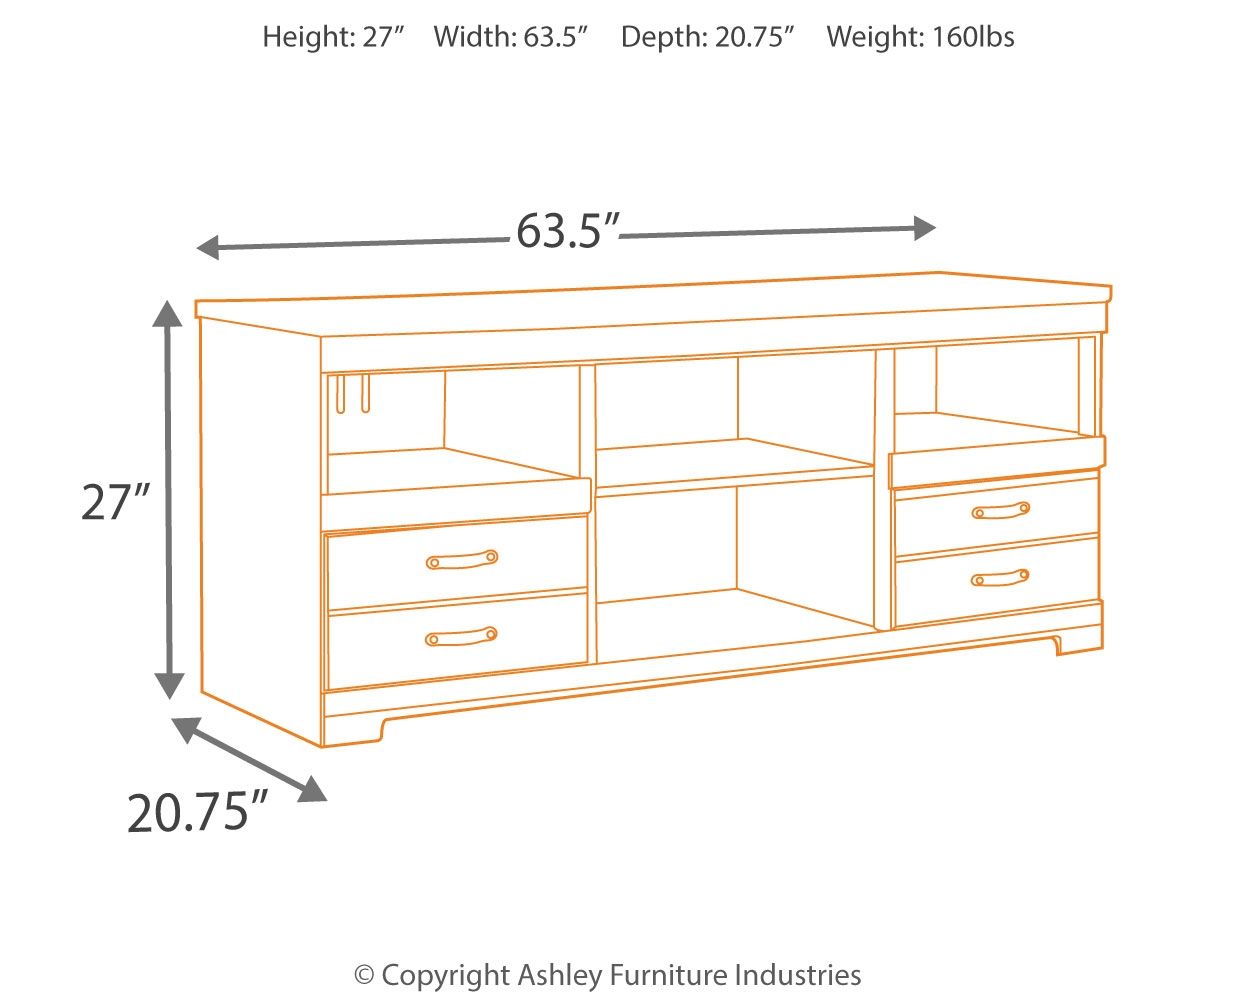 Trinell - TV Stand